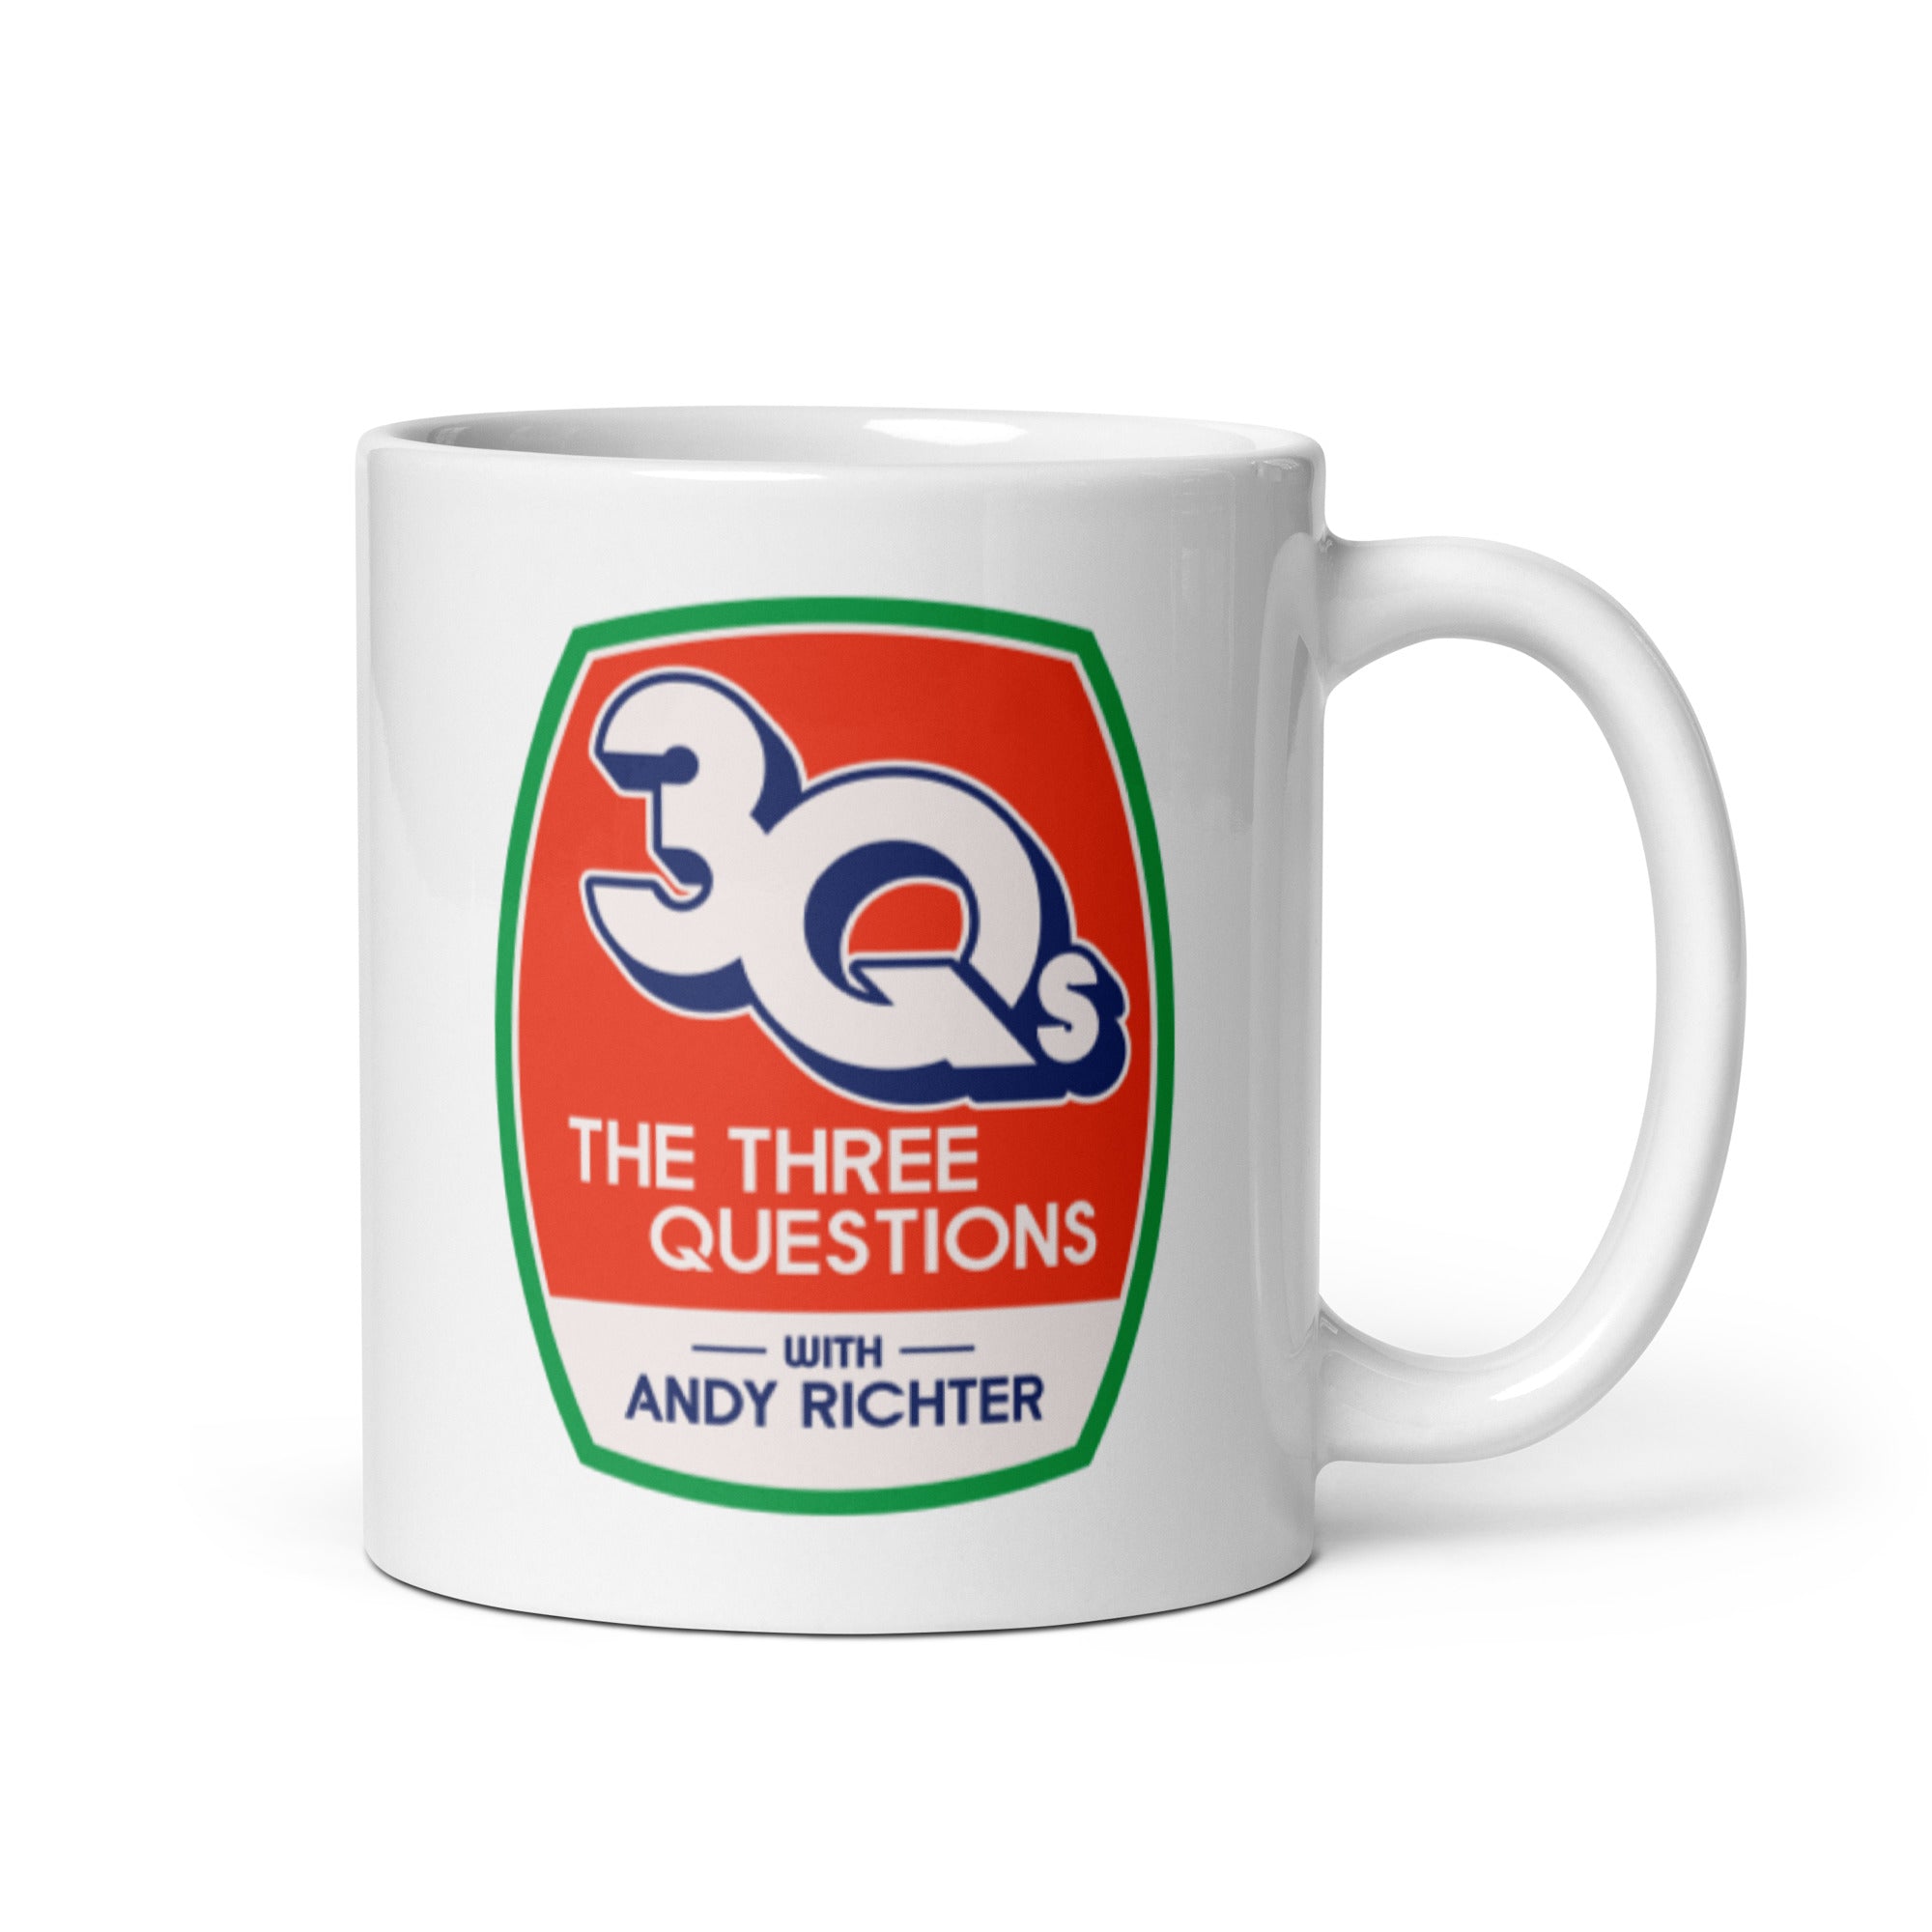 The Three Questions with Andy Richter: New Look Mug